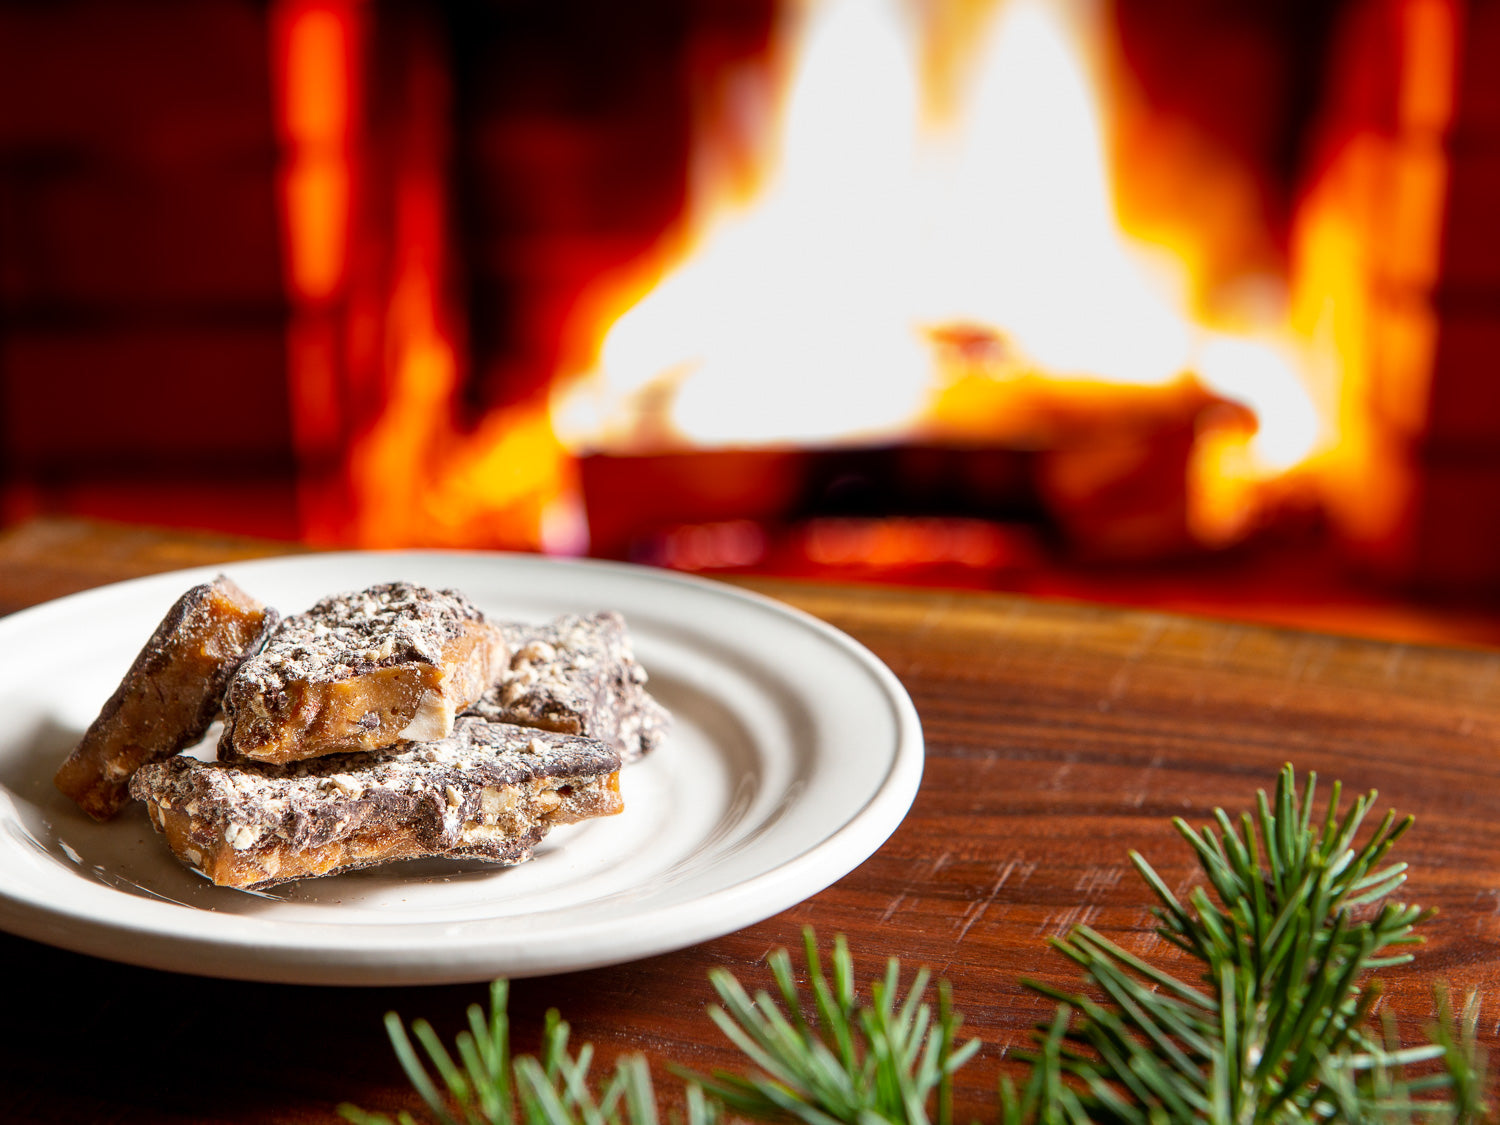 dish of chocolated dipped toffee in front of a cozy roaring fire